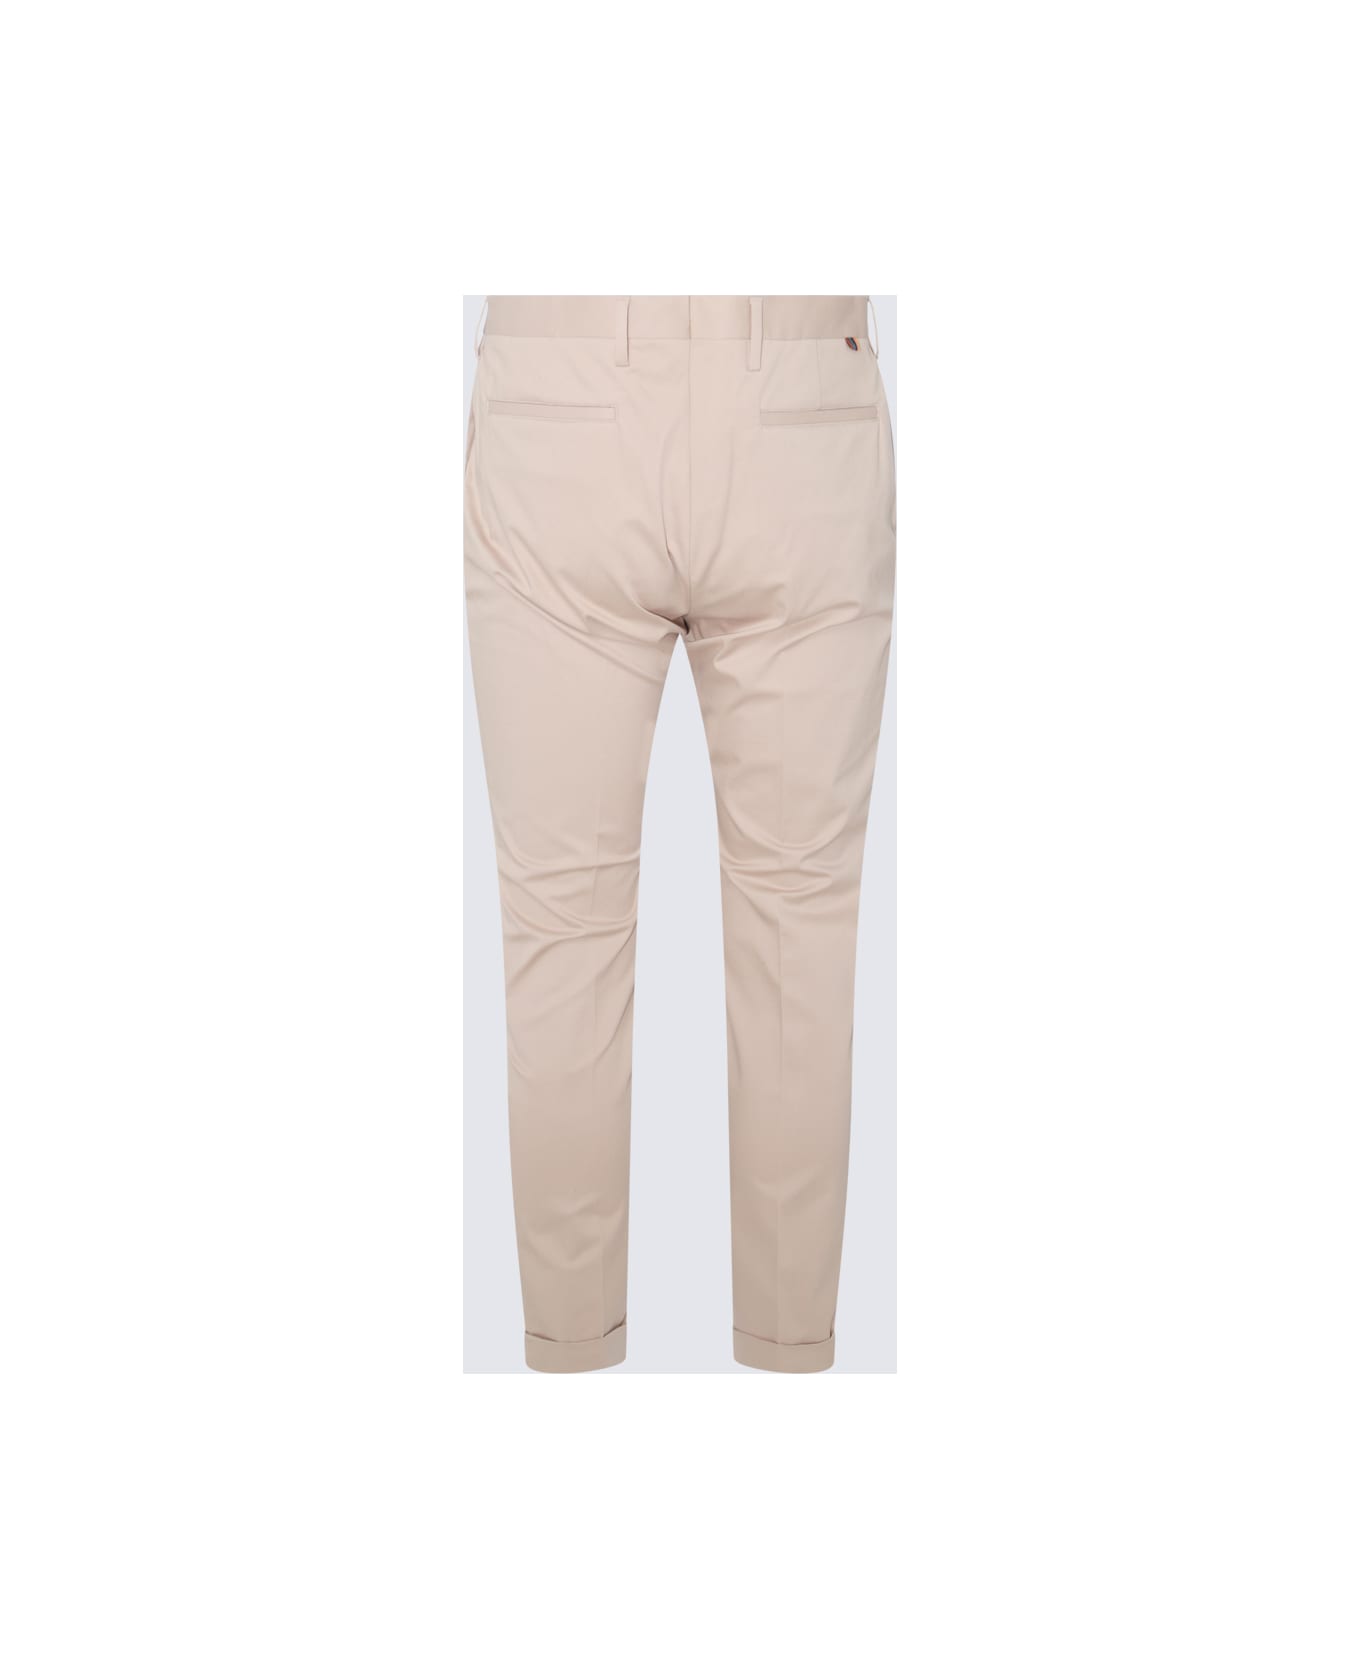 Paul Smith Beige Cotton Blend Trousers - Parc ボトムス